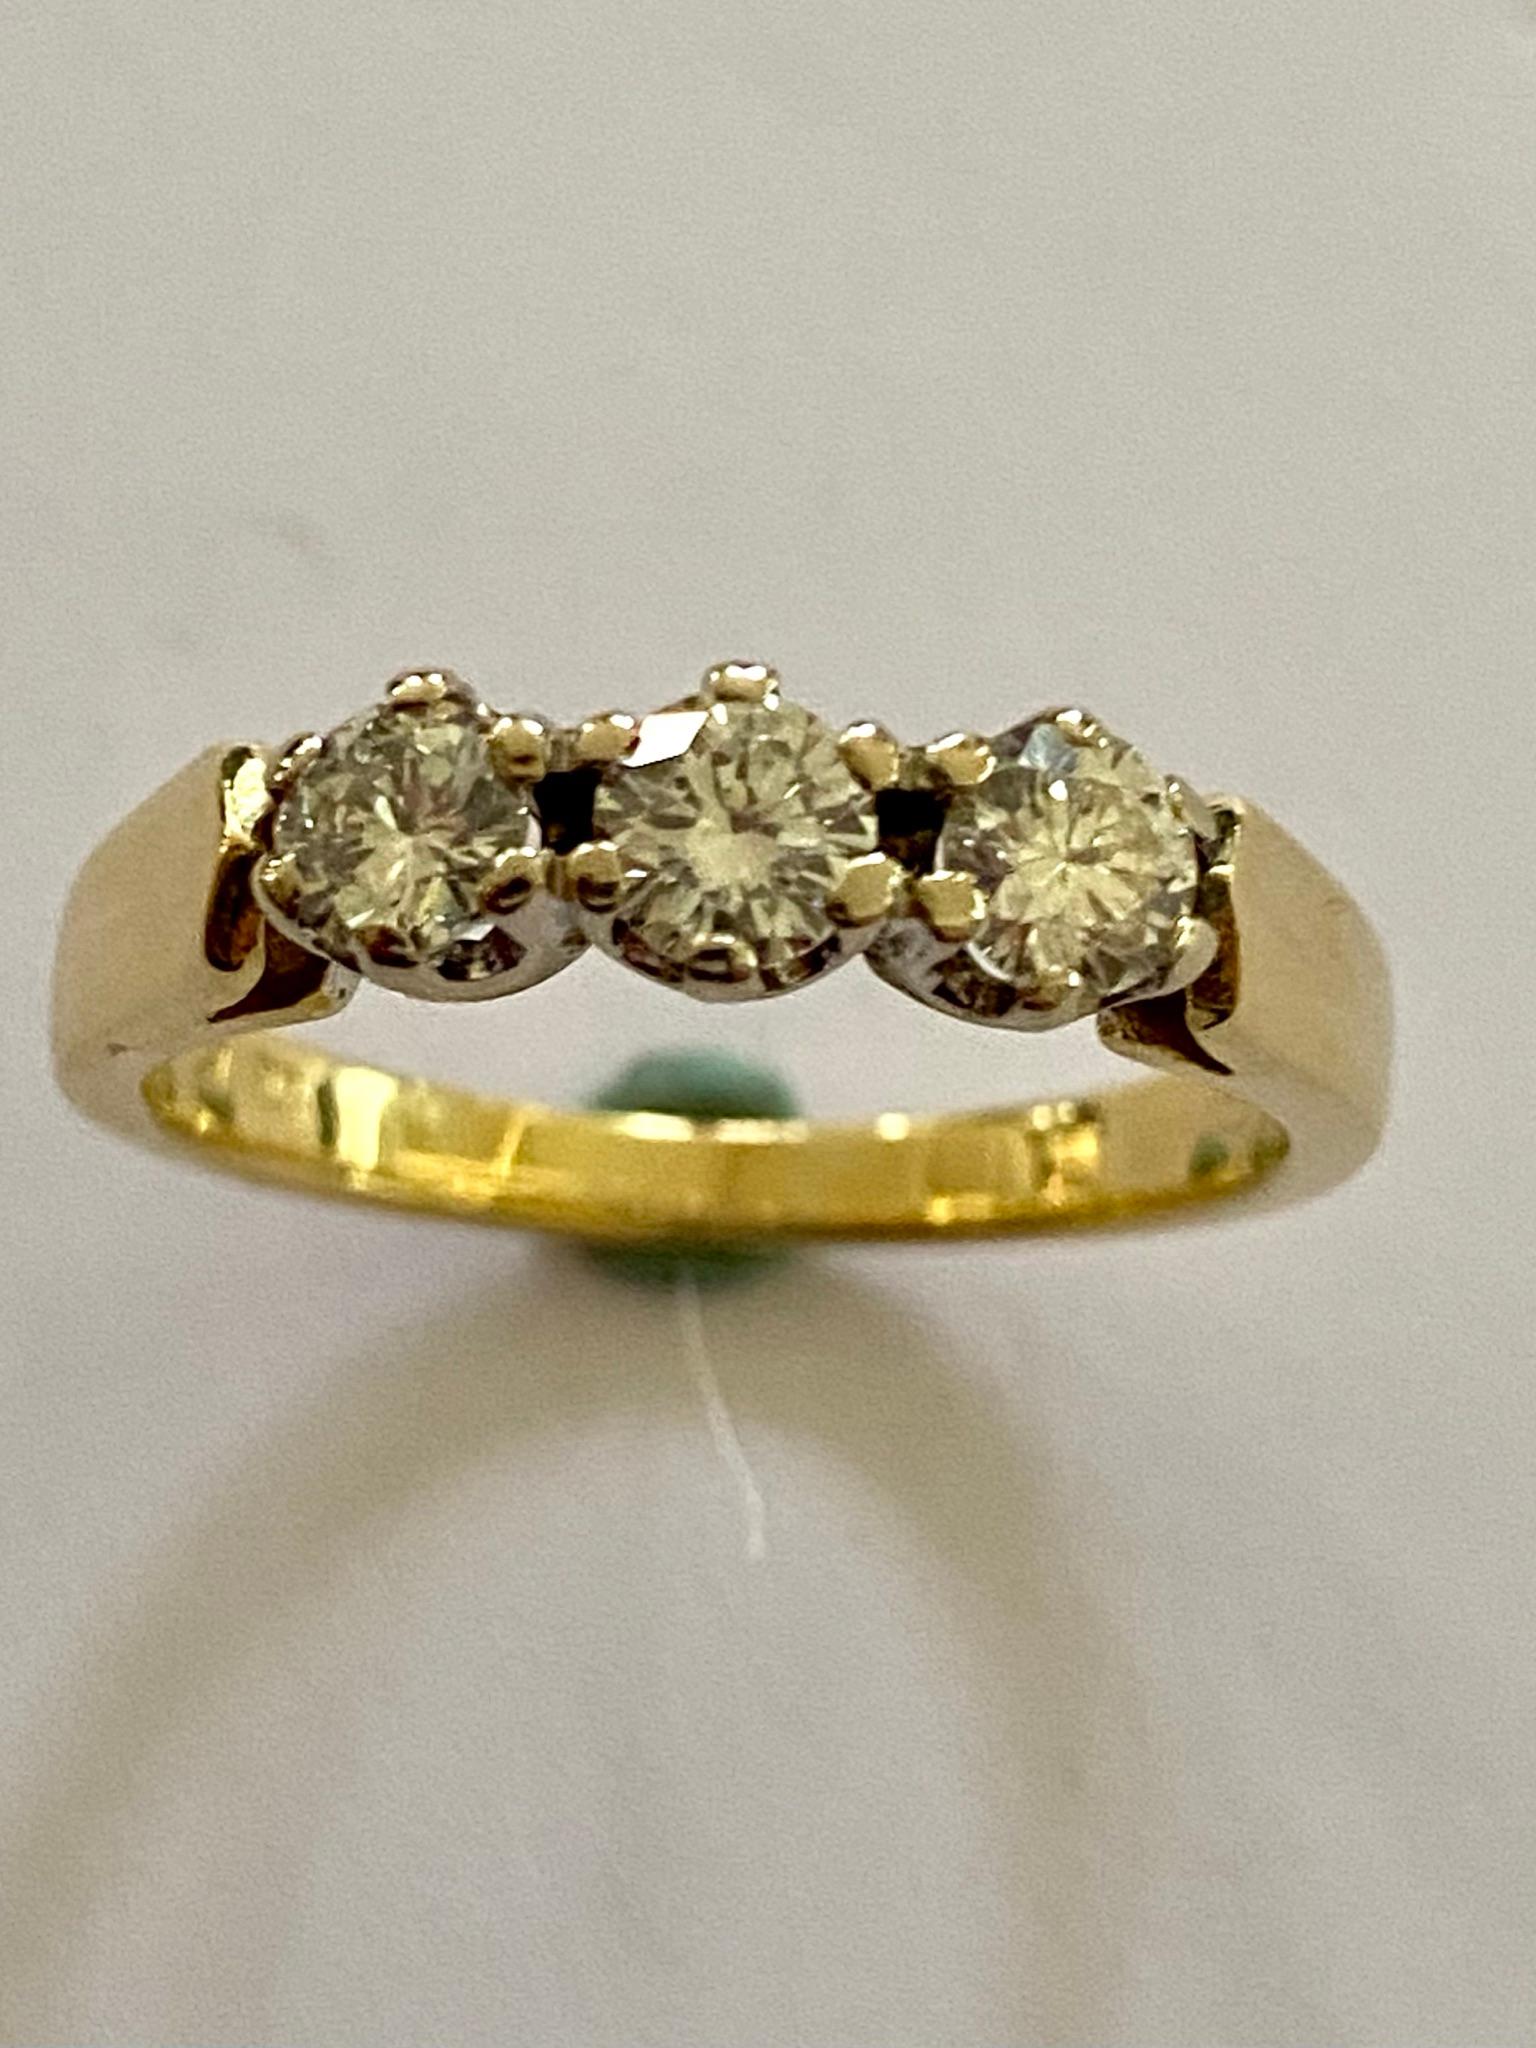 18K. yellow gold ring with 3 x white gold chatons (6 legs)
3x 0.20 ct = 0.60 ct Brilliant cut diamond. quality: VVS / VS color:
F-G (Top Wesselton)
Weight of the ring: 4.20 grams.
size: 17.5 (55) USA: 7.25 UK: O size of the head: 1.5 x 0.3 cm.
Made